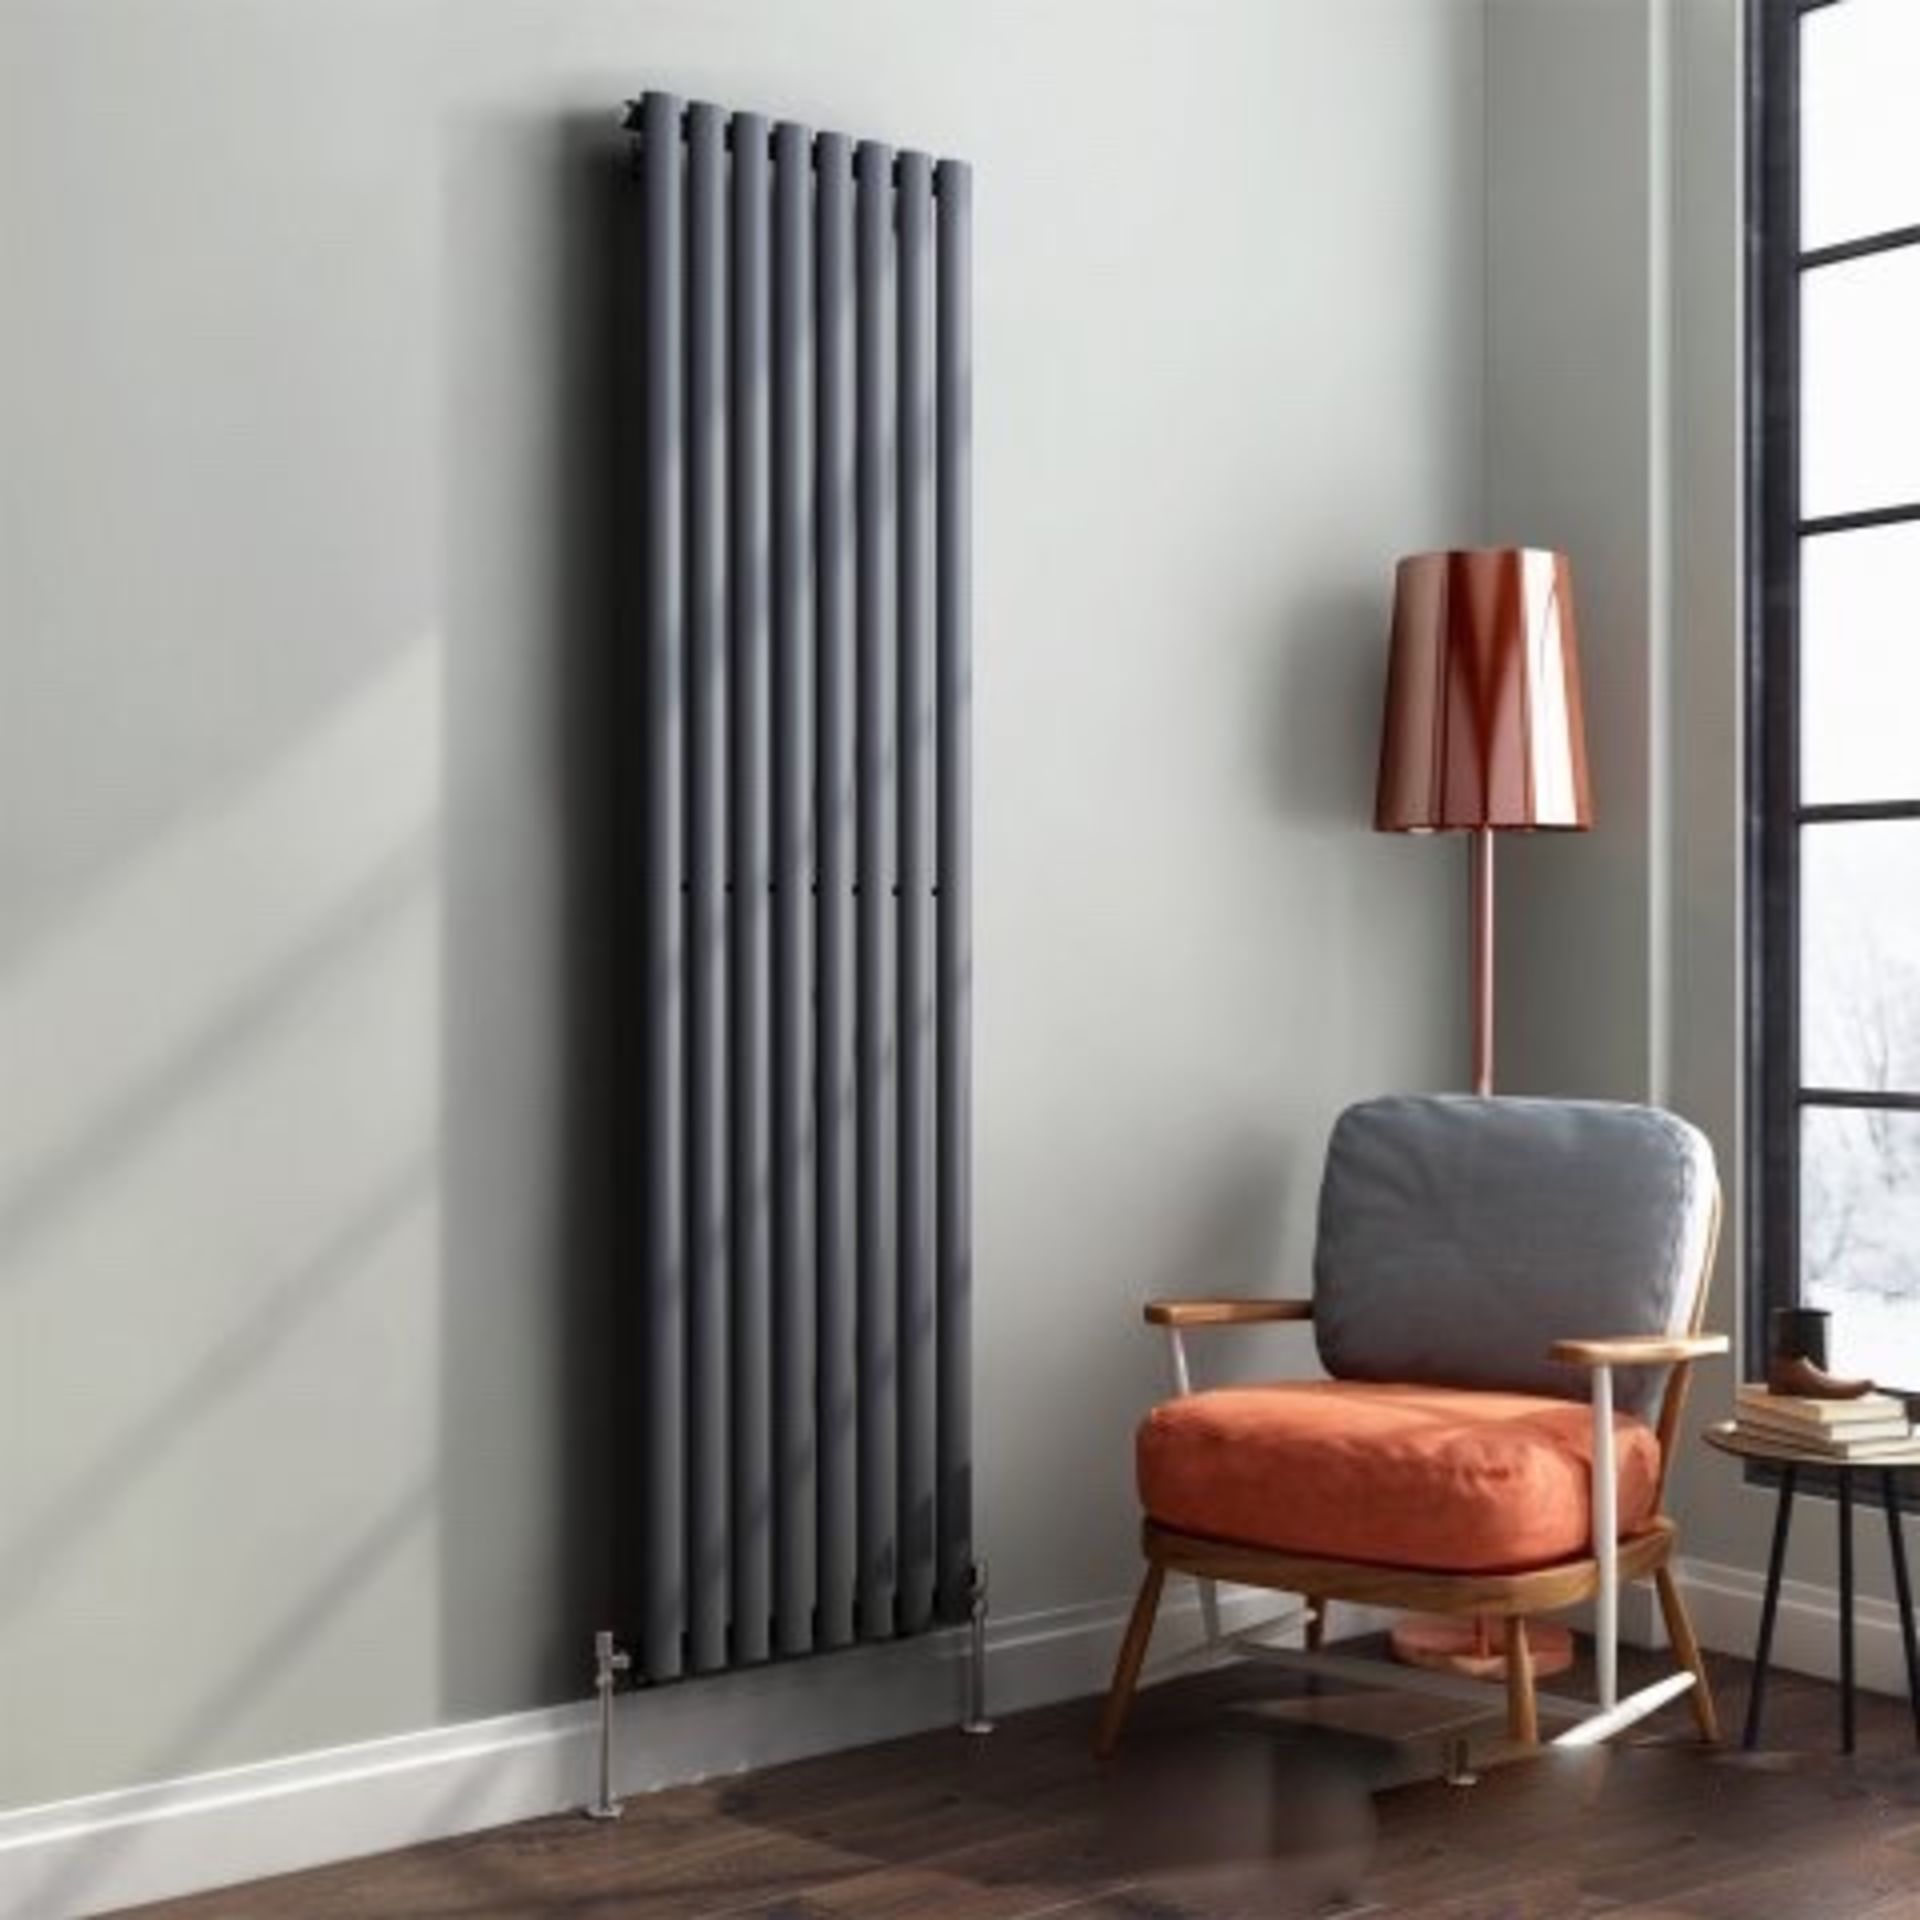 A44 - 1800x480mm Anthracite Single Oval Tube Vertical Radiator - Ember Premium. RRP £223.99 For an - Image 3 of 4